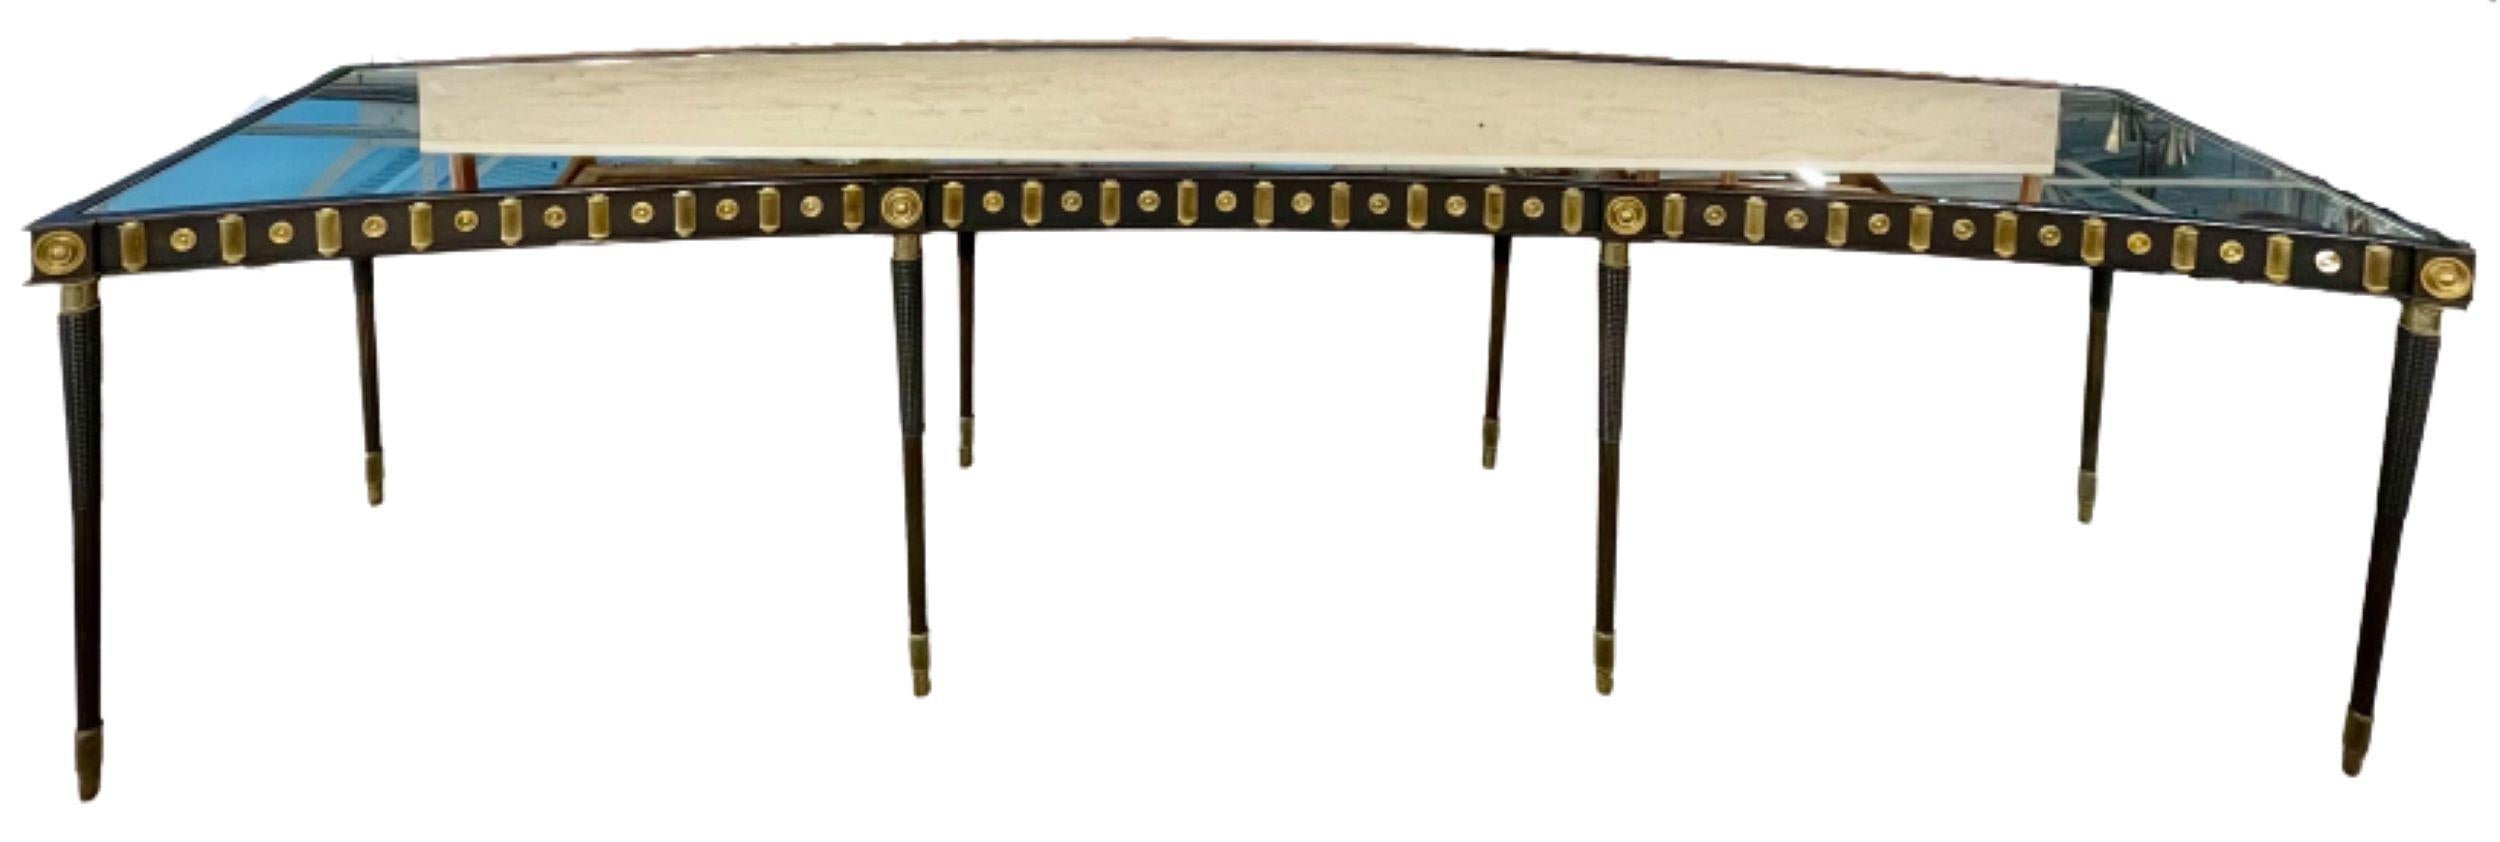 Maison Jansen Monumental Concave steel and bronze console / sideboard table. This stunning one of a kind concave on one side and demilune if you turn it around case is comprised of all steel and bronze elements. The finely cast sabots leading to a